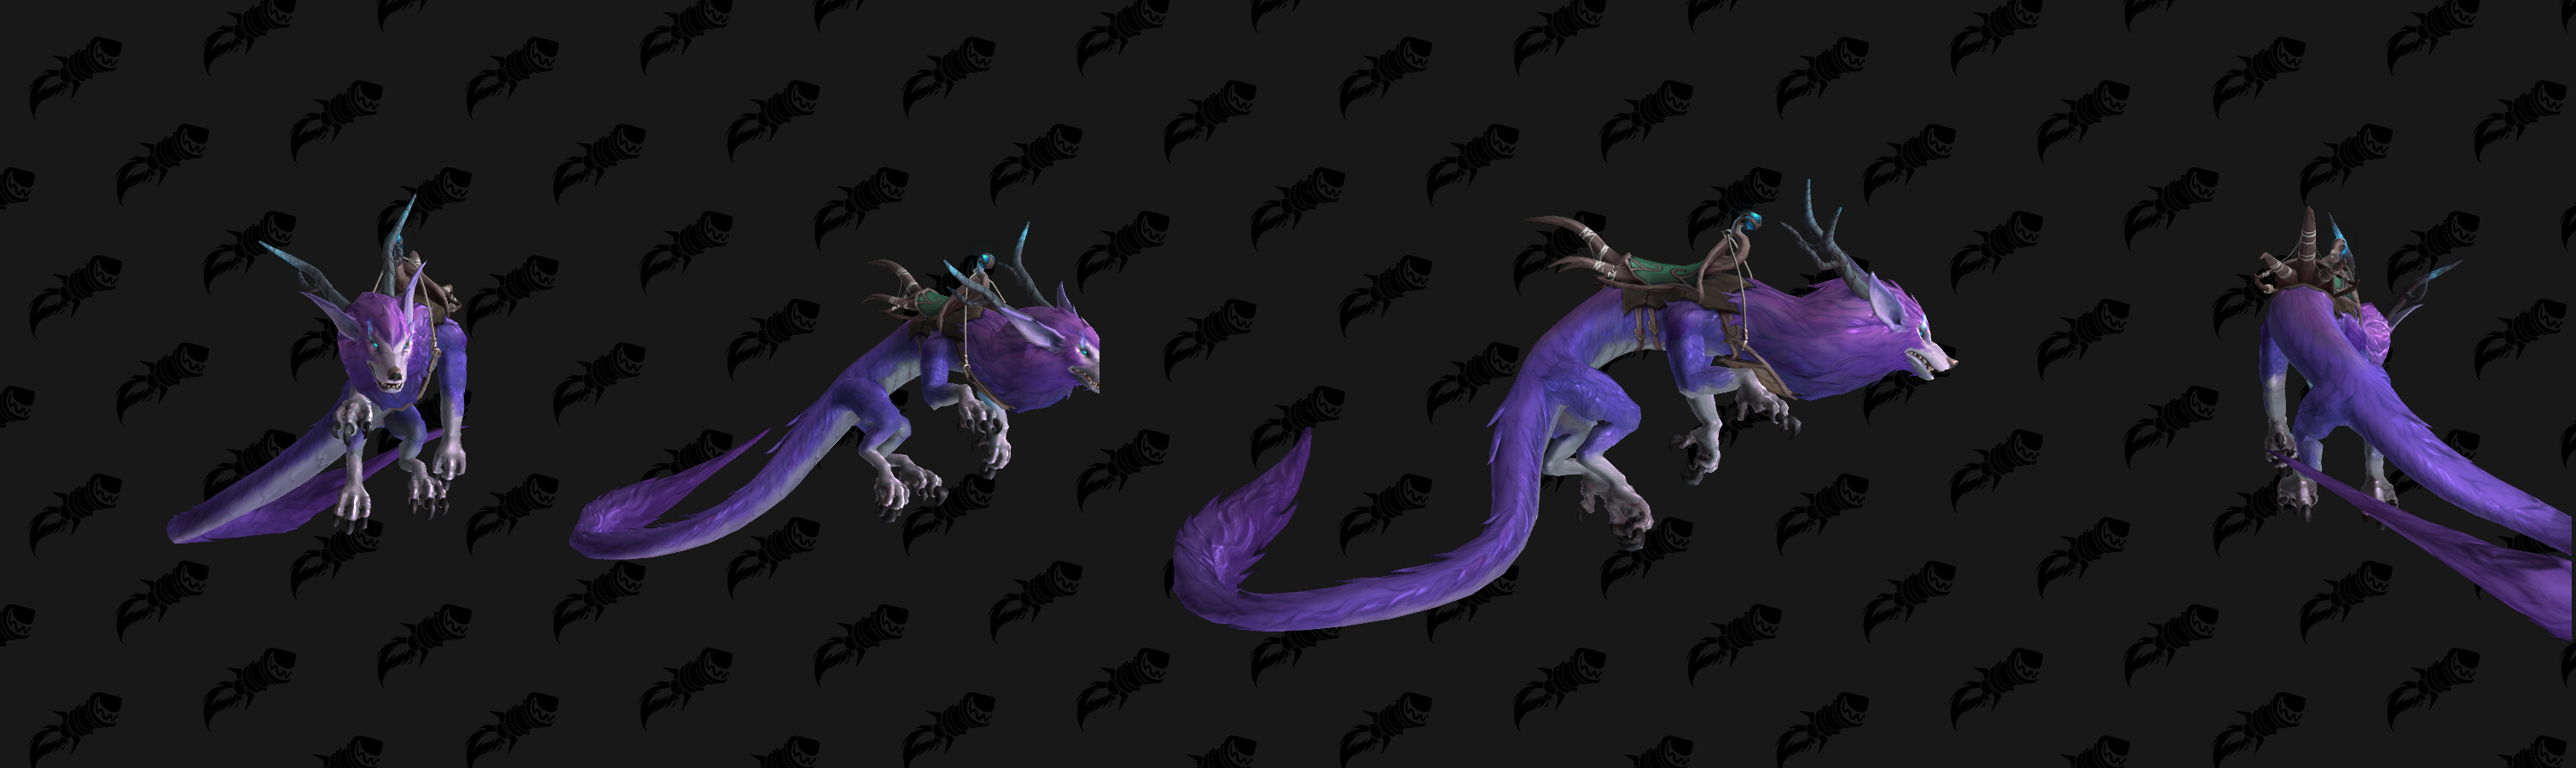 Ve'nari Paragon Mount and Pet Rewards Coming in Patch 9.1 - Wowhead News